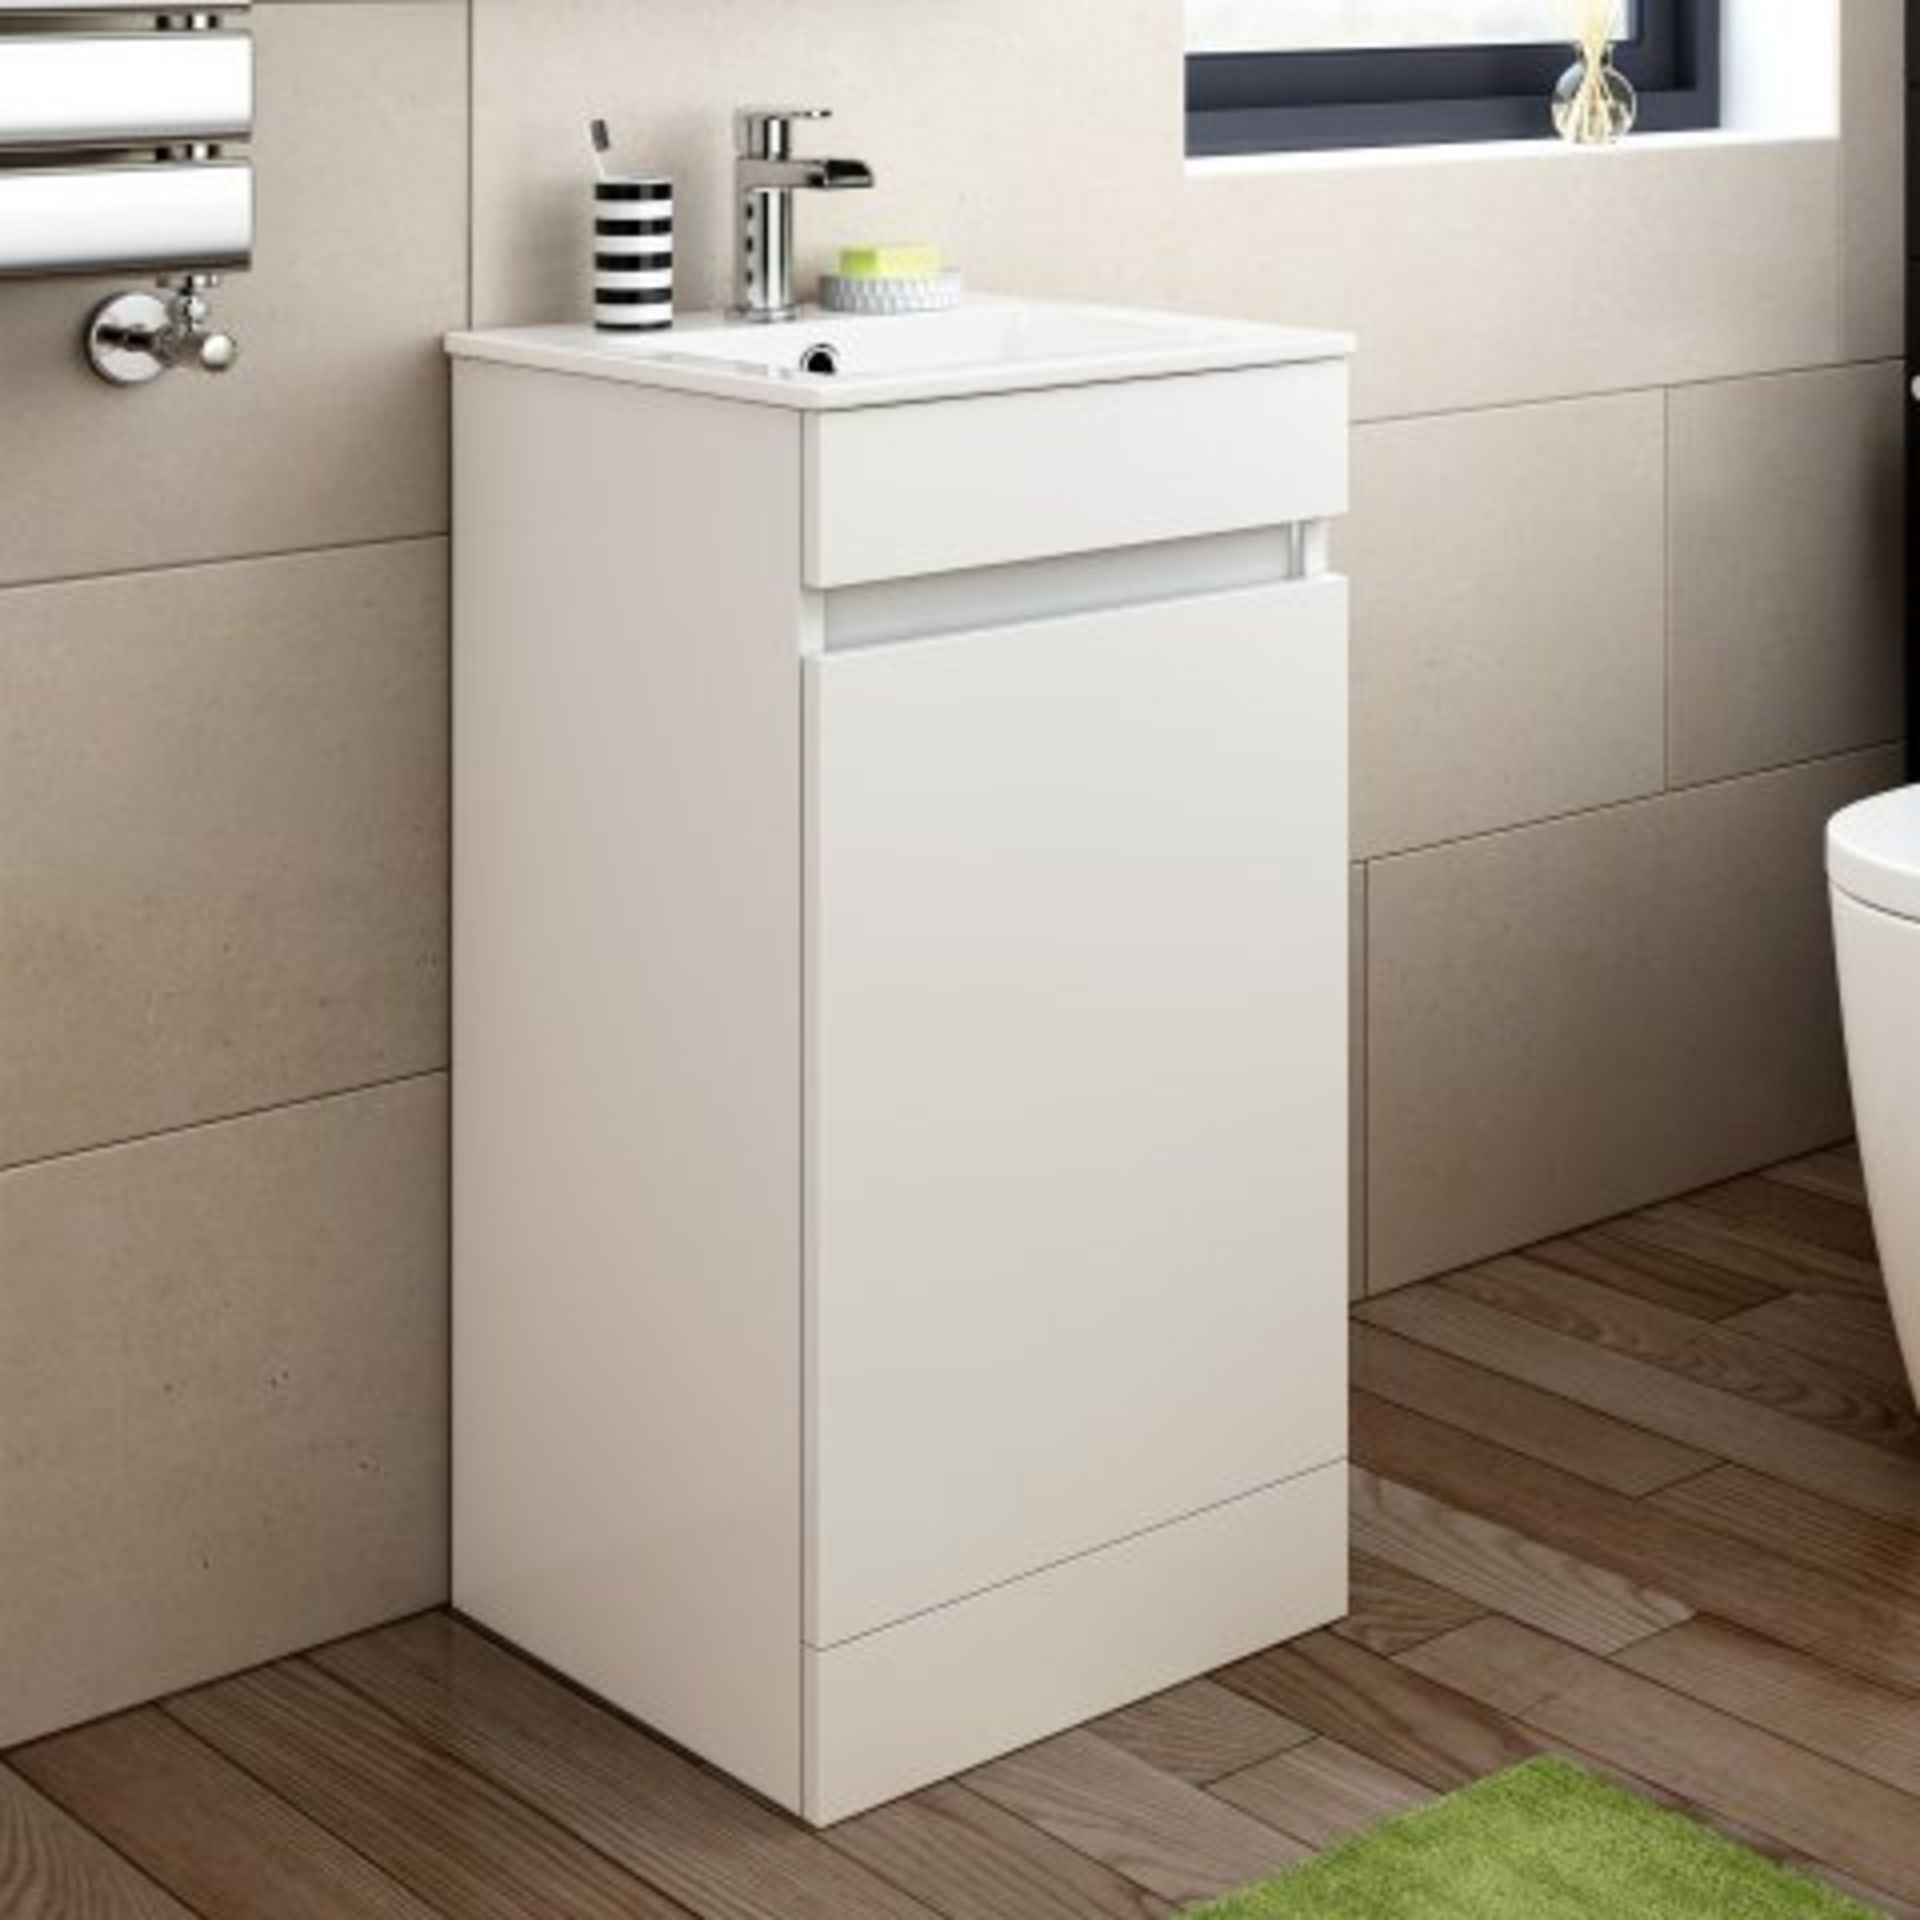 (REF34) 400mm Trent High Gloss White Basin Cabinet - Floor Standing. RRP £234.99. WITH BASIN This